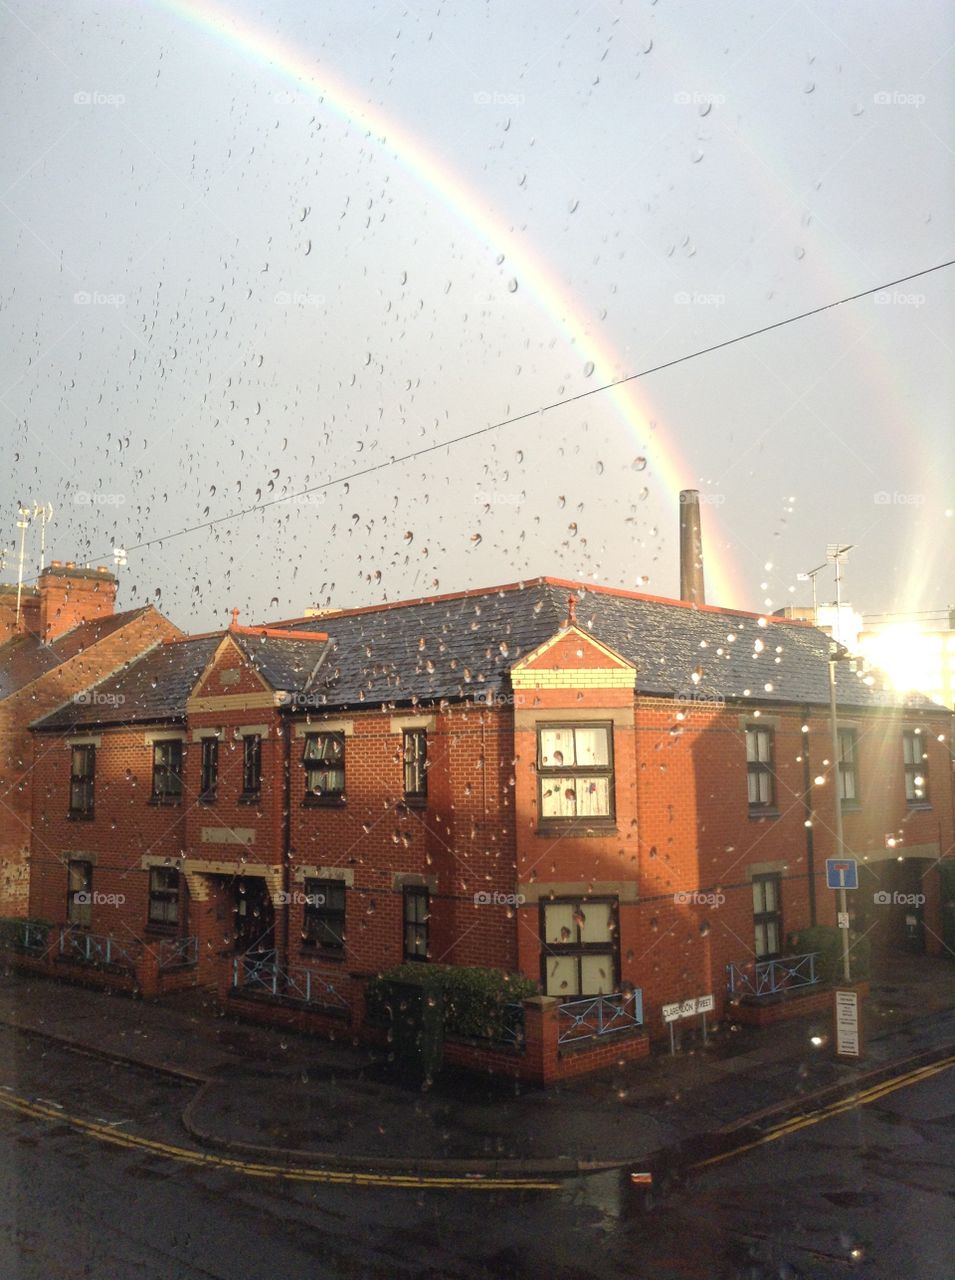 Rainbow in a rainy day at Leicester city